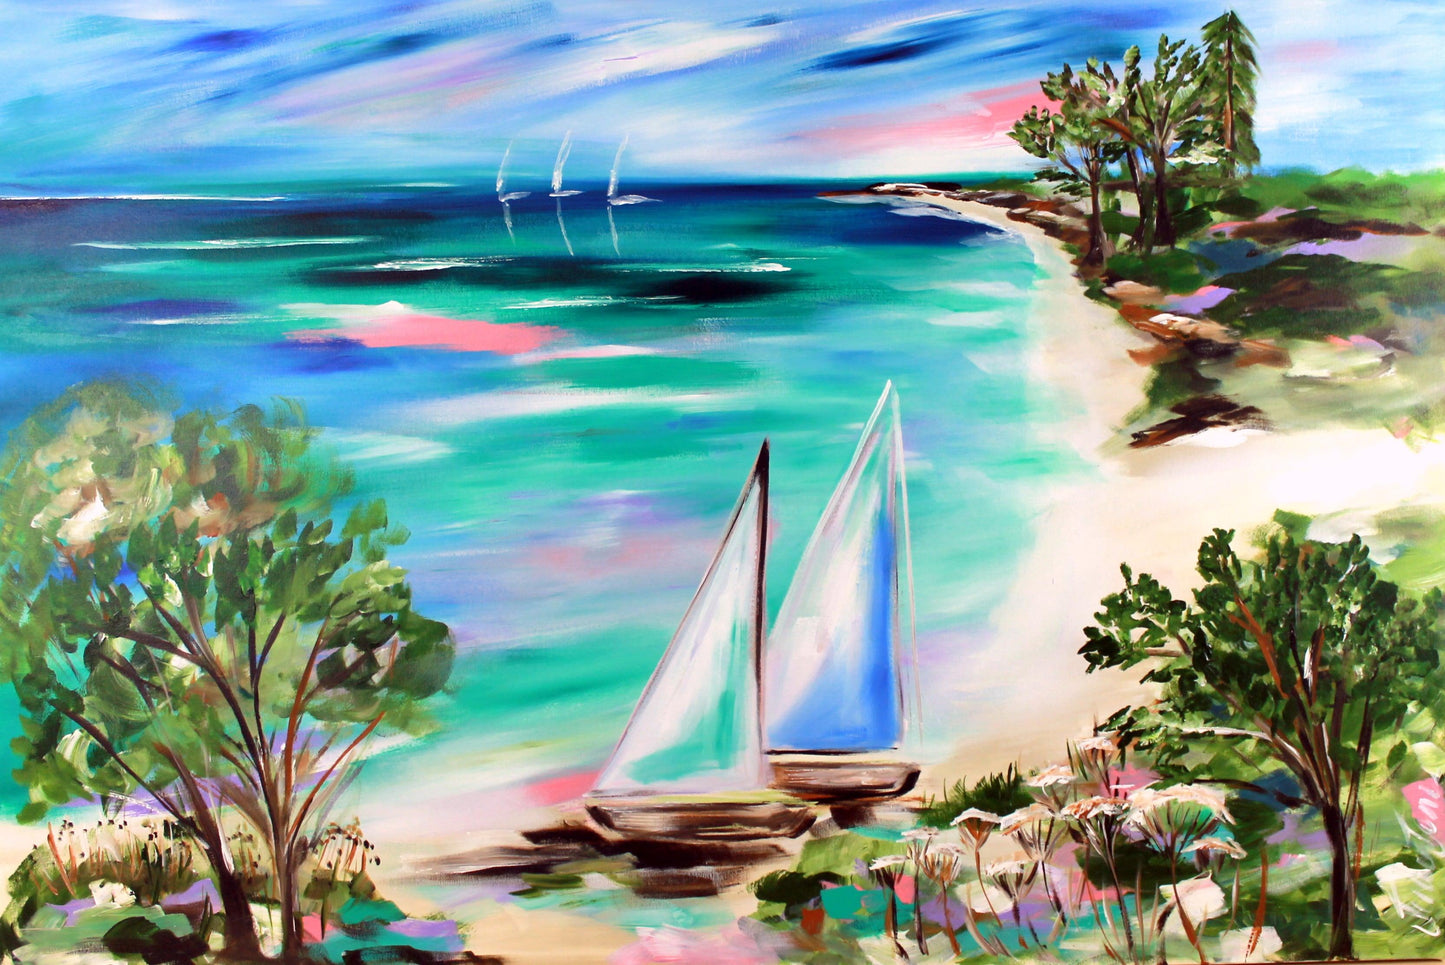 Original Canvas Painting - Beautiful day on the ocean - 1.2 x 800